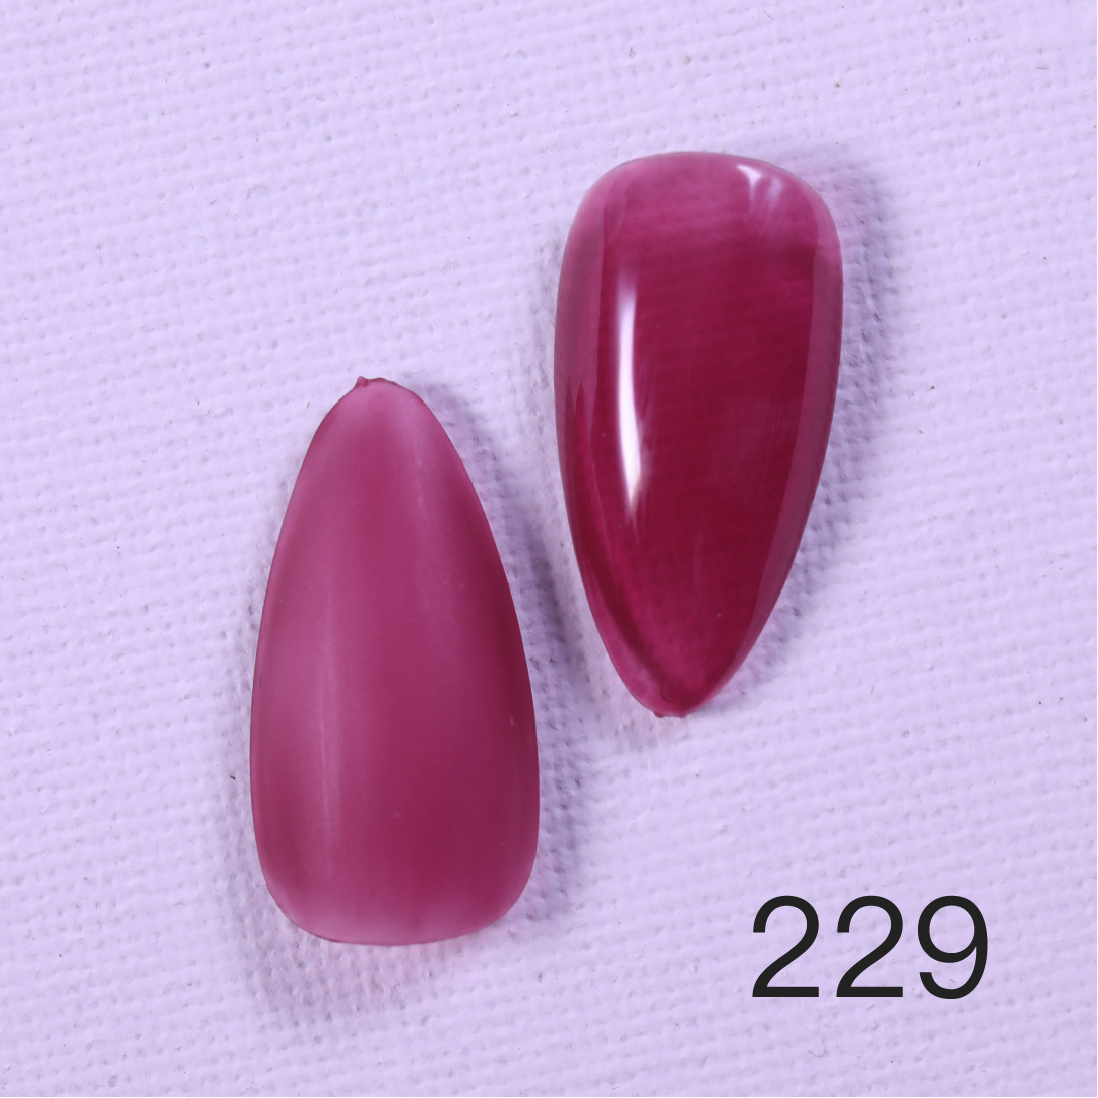 {{ GelPolish_USA }} GelPolish USA 229 GelPolish USA Mela Mela Gel Polish Colour - 80 colors available to choose from - {{ UV_Drying_machine}} - {{ Powerful_LED_Nail_Dryer}} {{ Gelish }} {{Gel_nail_polish}} {{ Gel_polish }}